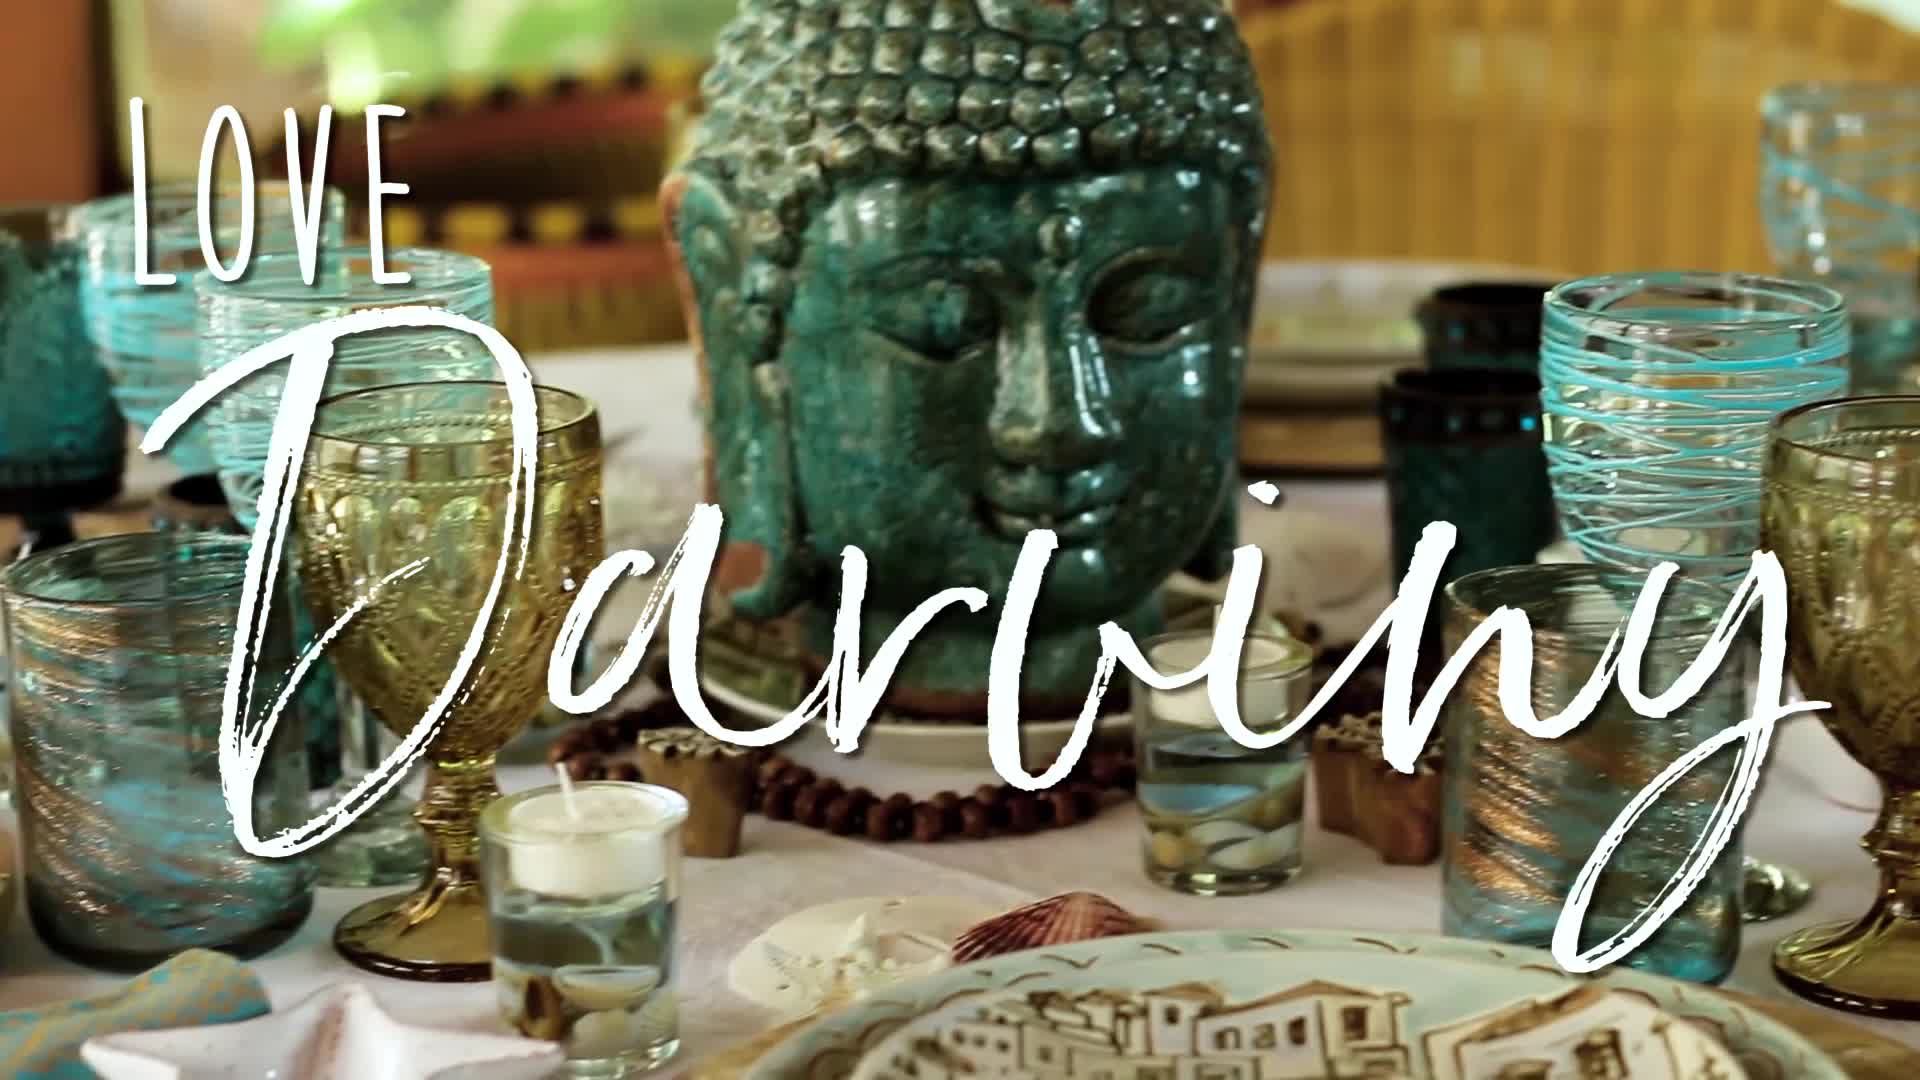 The Love, Darviny Show - How to Make a Greek Zen Table Trailer 